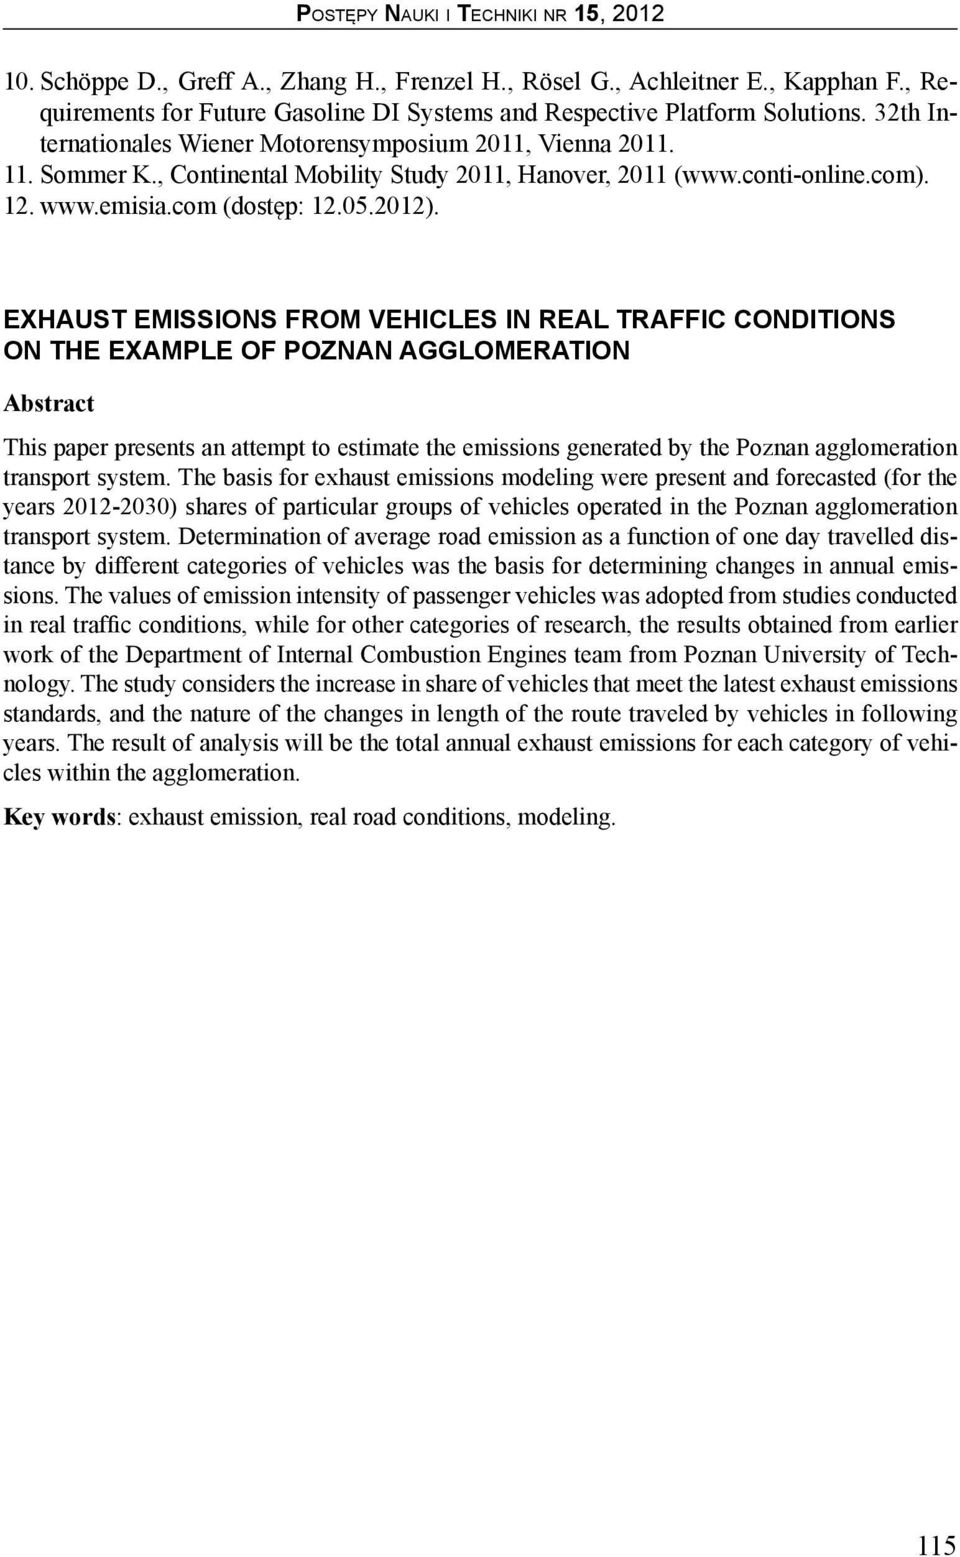 EXHAUST EMISSIONS FROM VEHICLES IN REAL TRAFFIC CONDITIONS ON THE EXAMPLE OF POZNAN AGGLOMERATION Abstract This paper presents an attempt to estimate the emissions generated by the Poznan